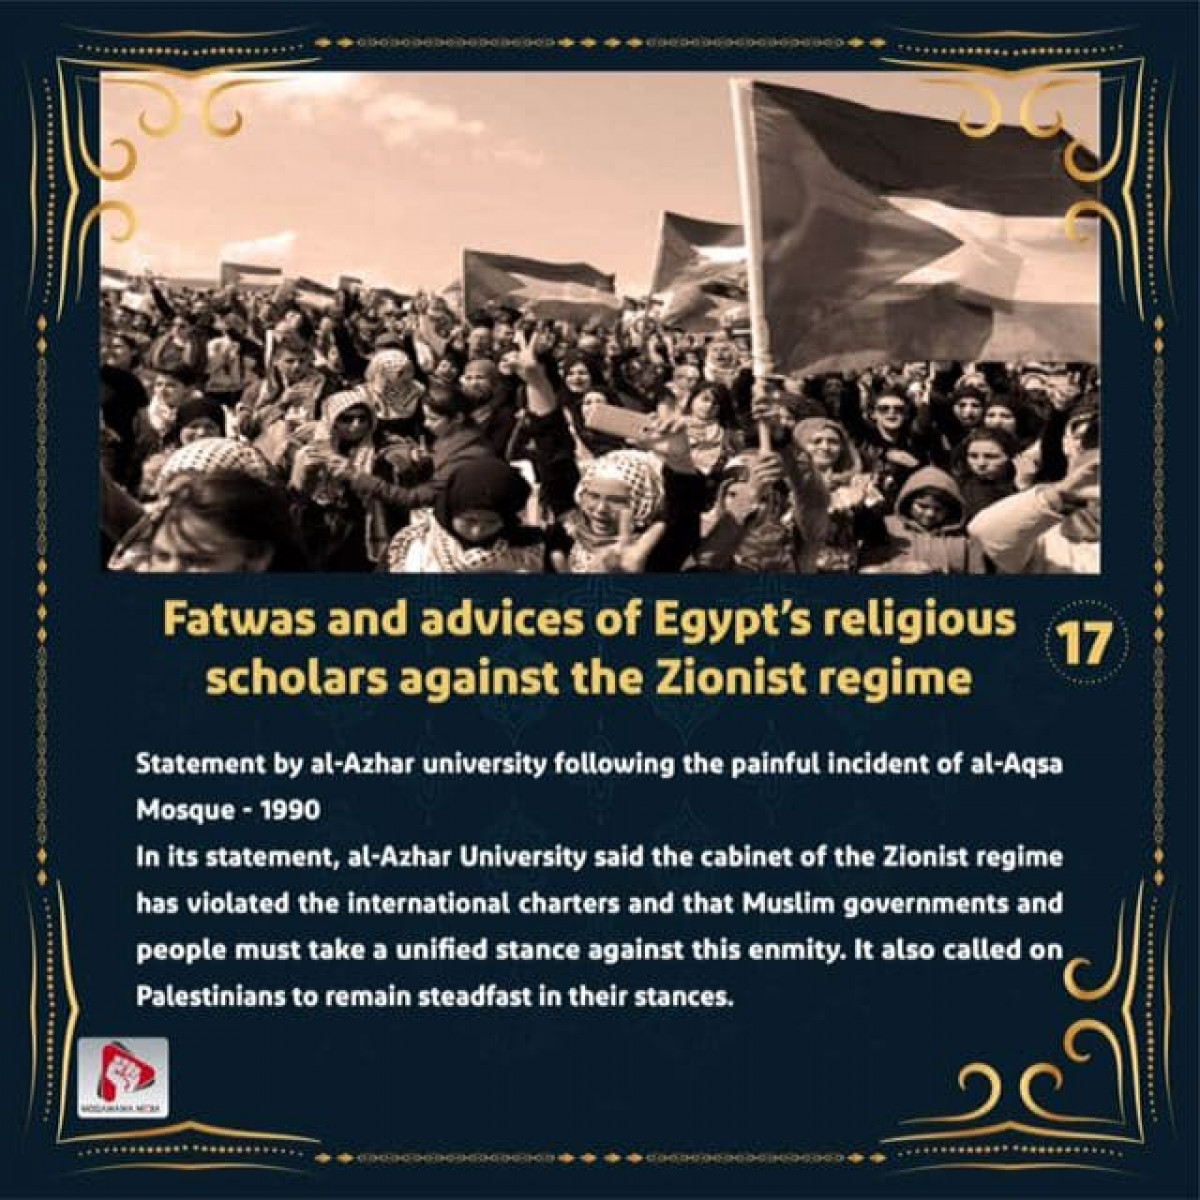 Fatwas and advices of Egypt's religious scholars against the Zionist regime 17